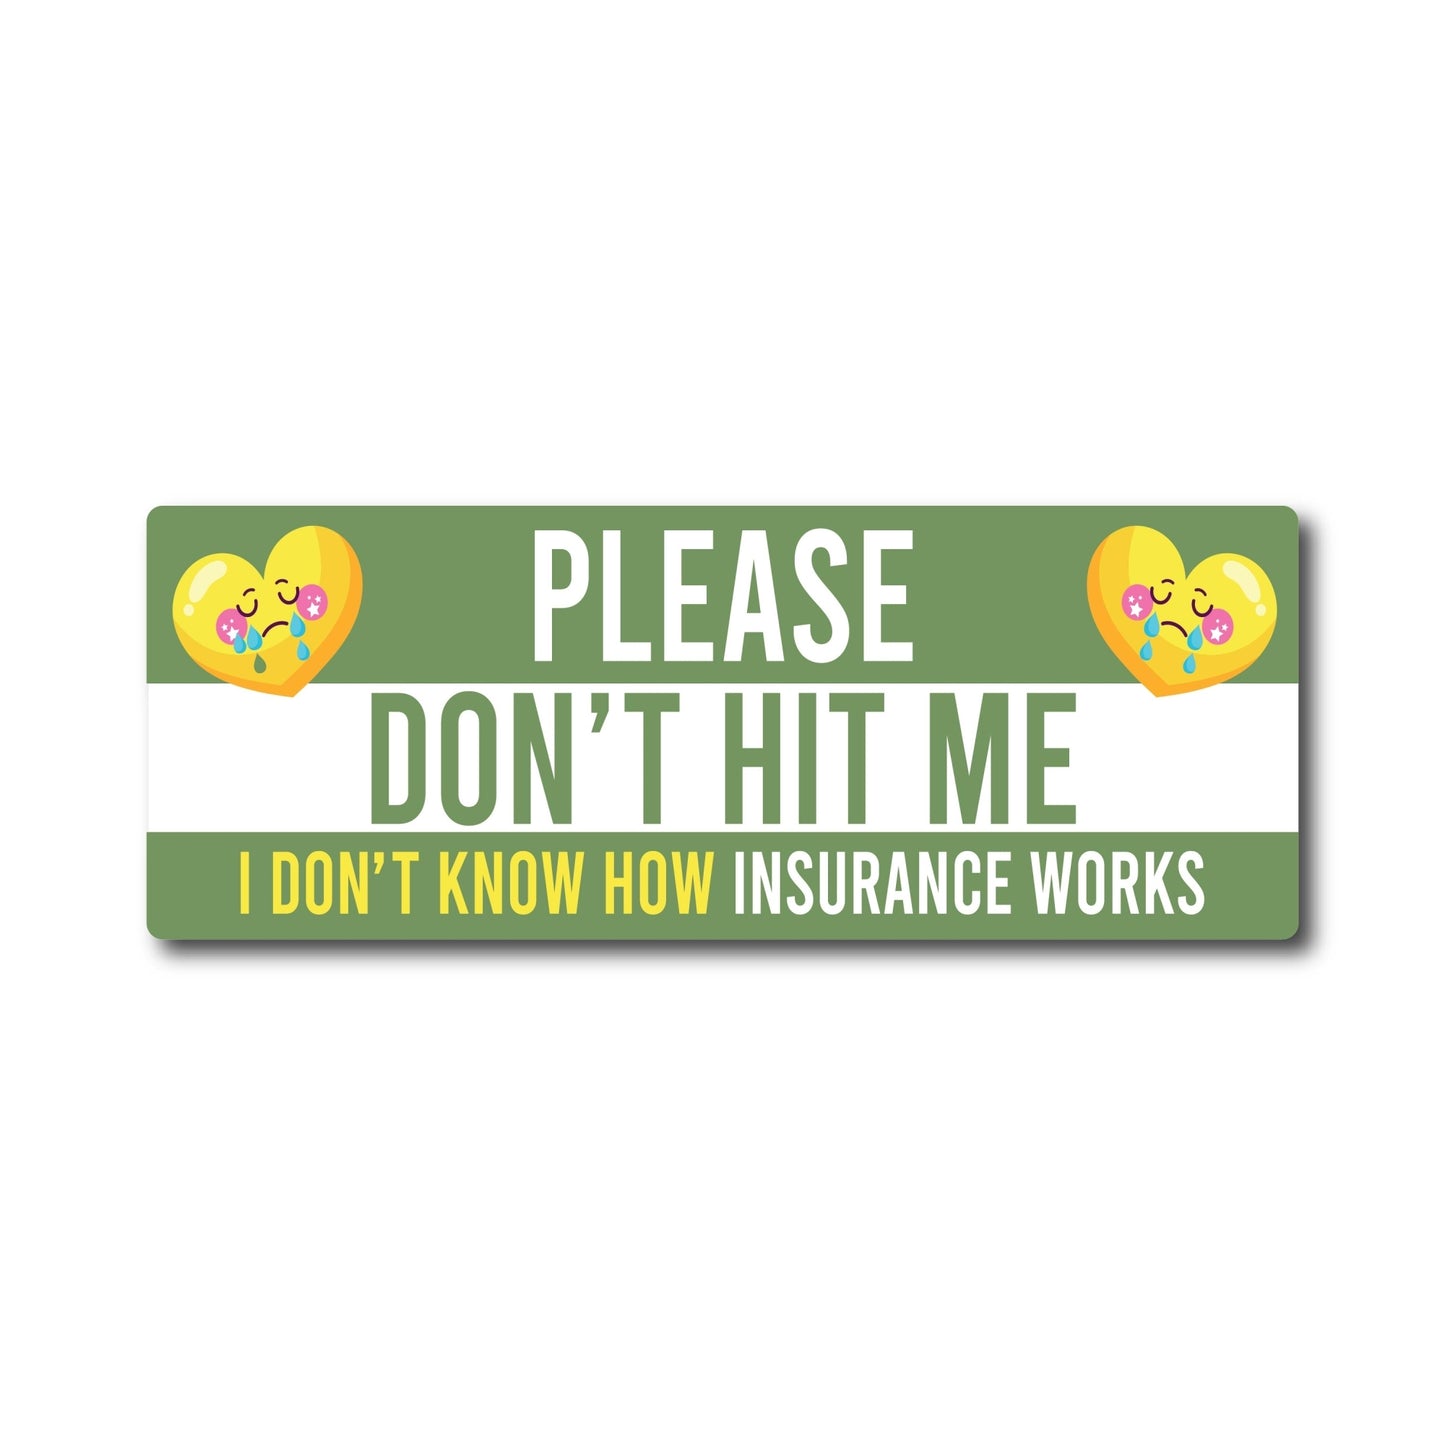 Magnet Me Up Please Don't Hit Me, I Don't Know How Insurance Works Magnet Decal, 3x8 inch, Heavy Duty for Car, Truck, SUV, Or Any Other Magnetic Surface, Funny Meme Culture Gift Idea, Crafted in USA